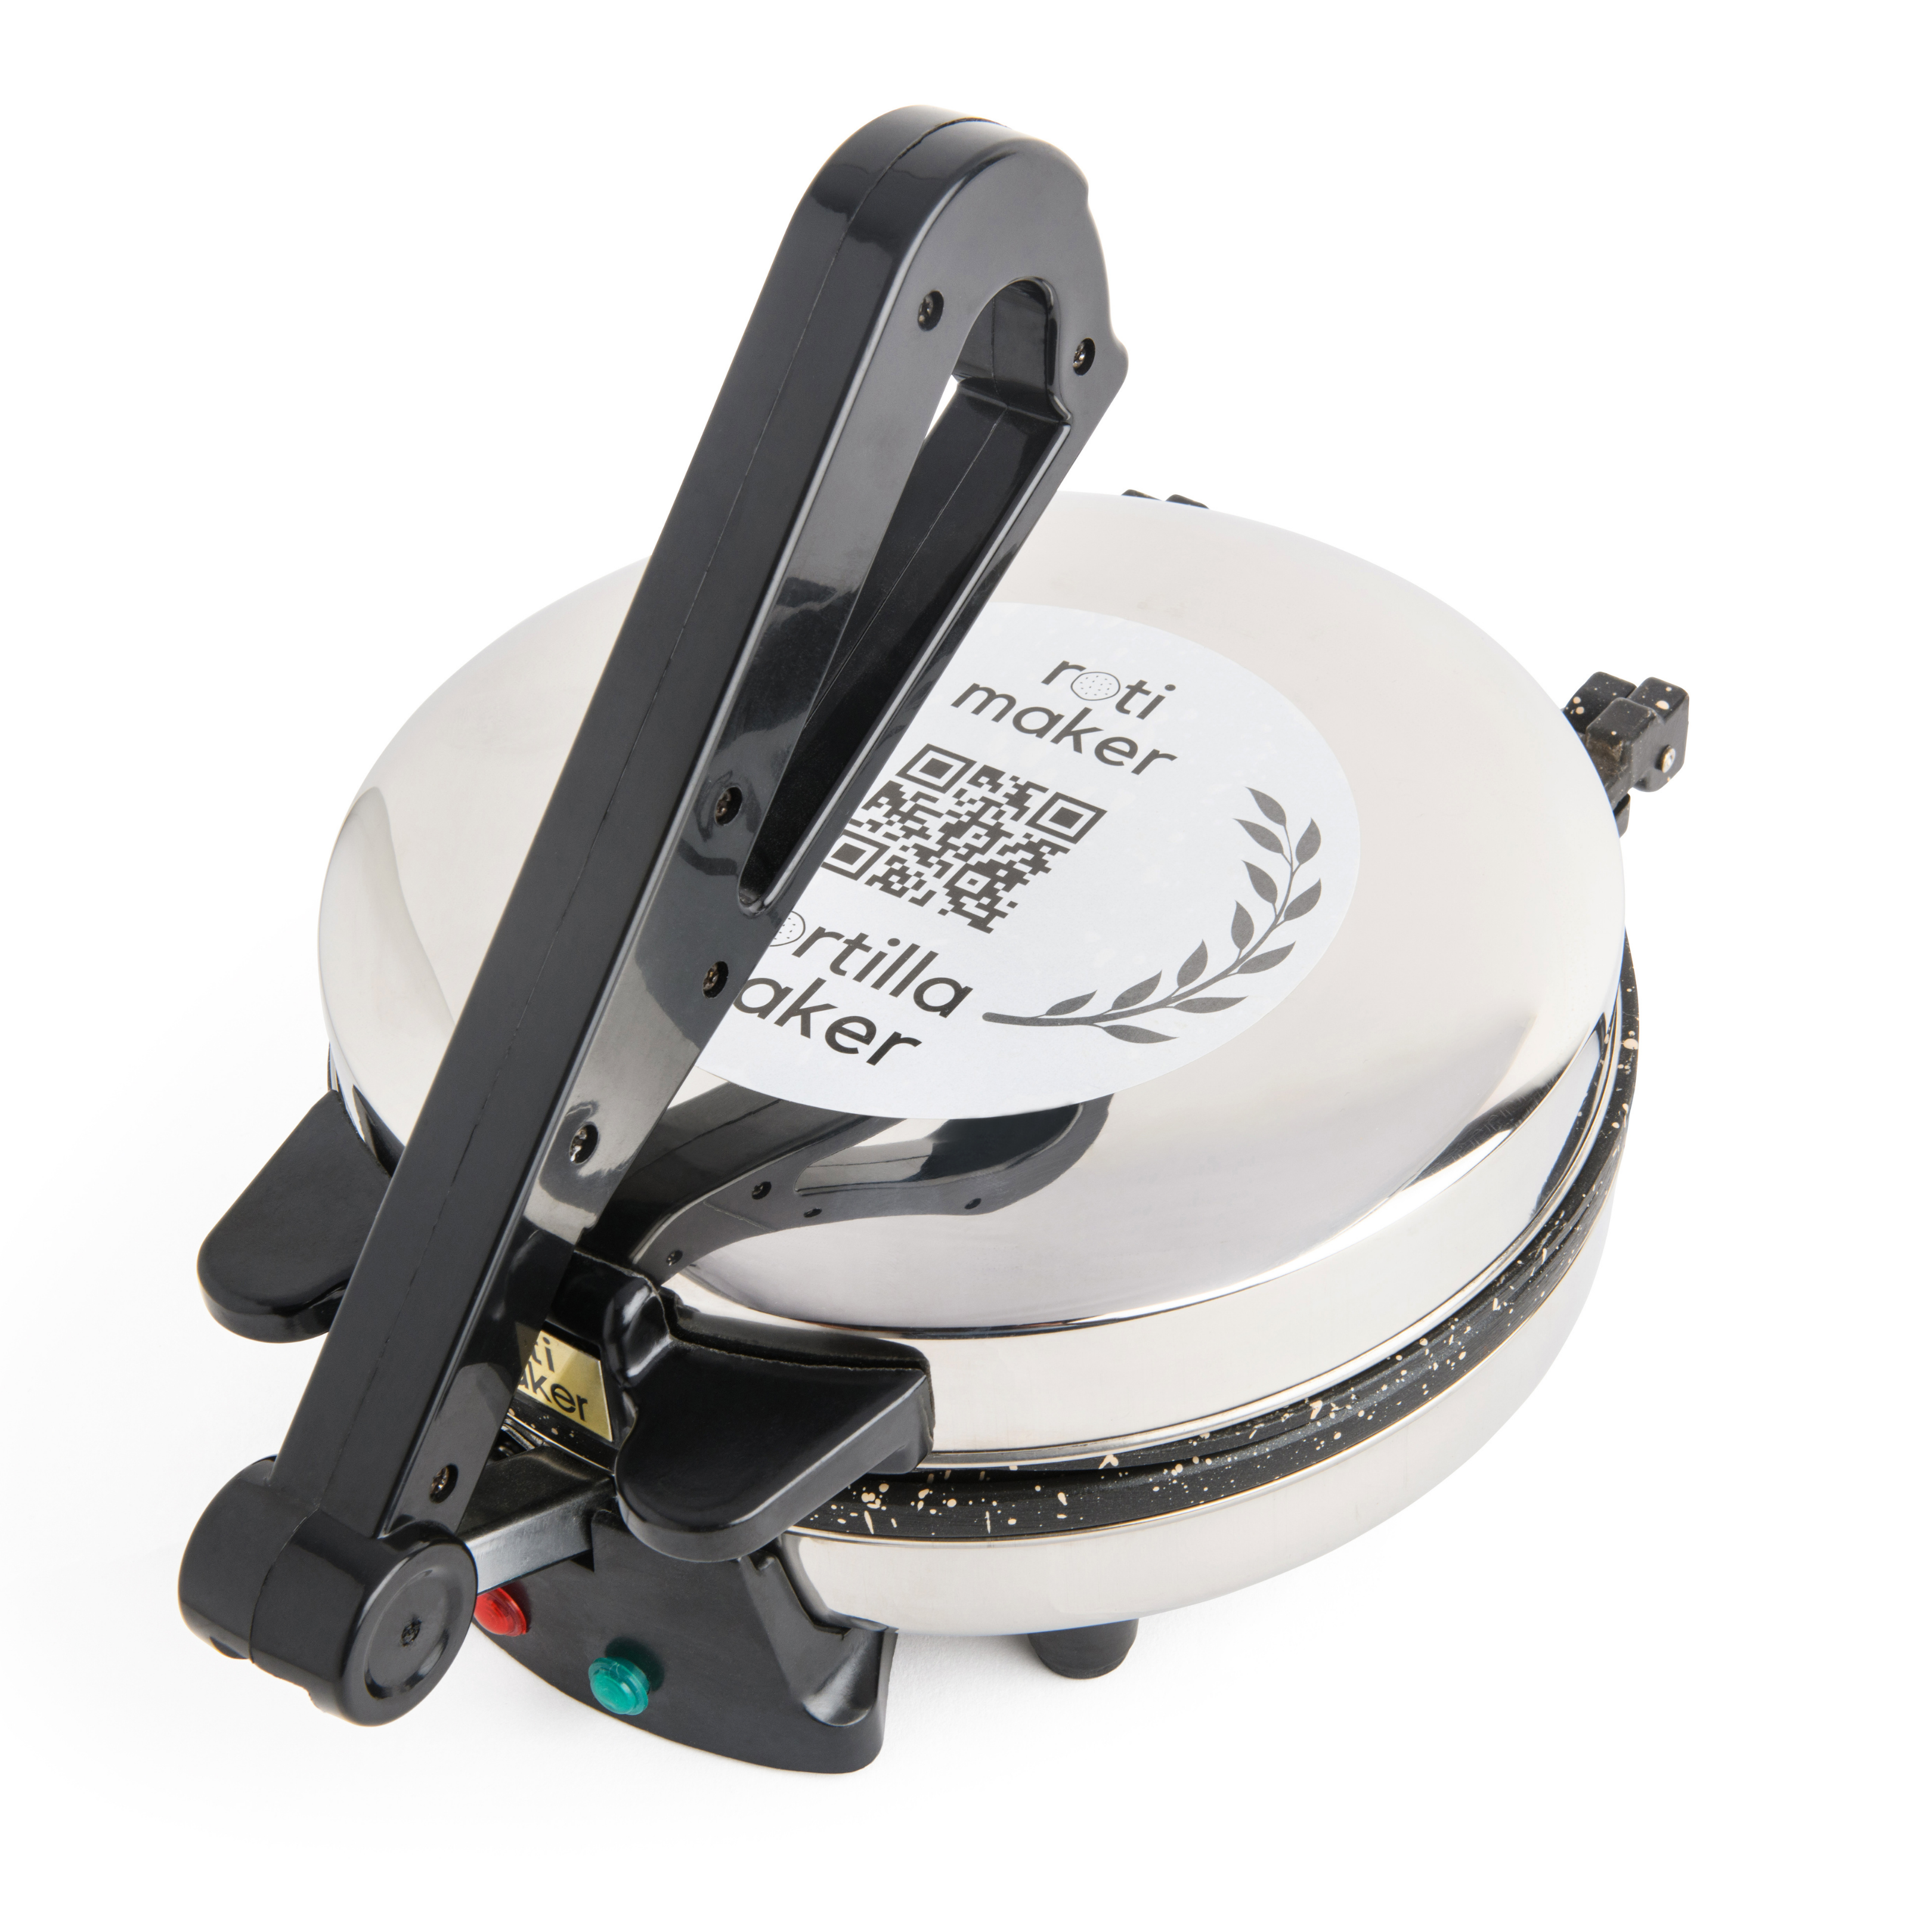 The Roti Maker 2.0 - Curved Dish